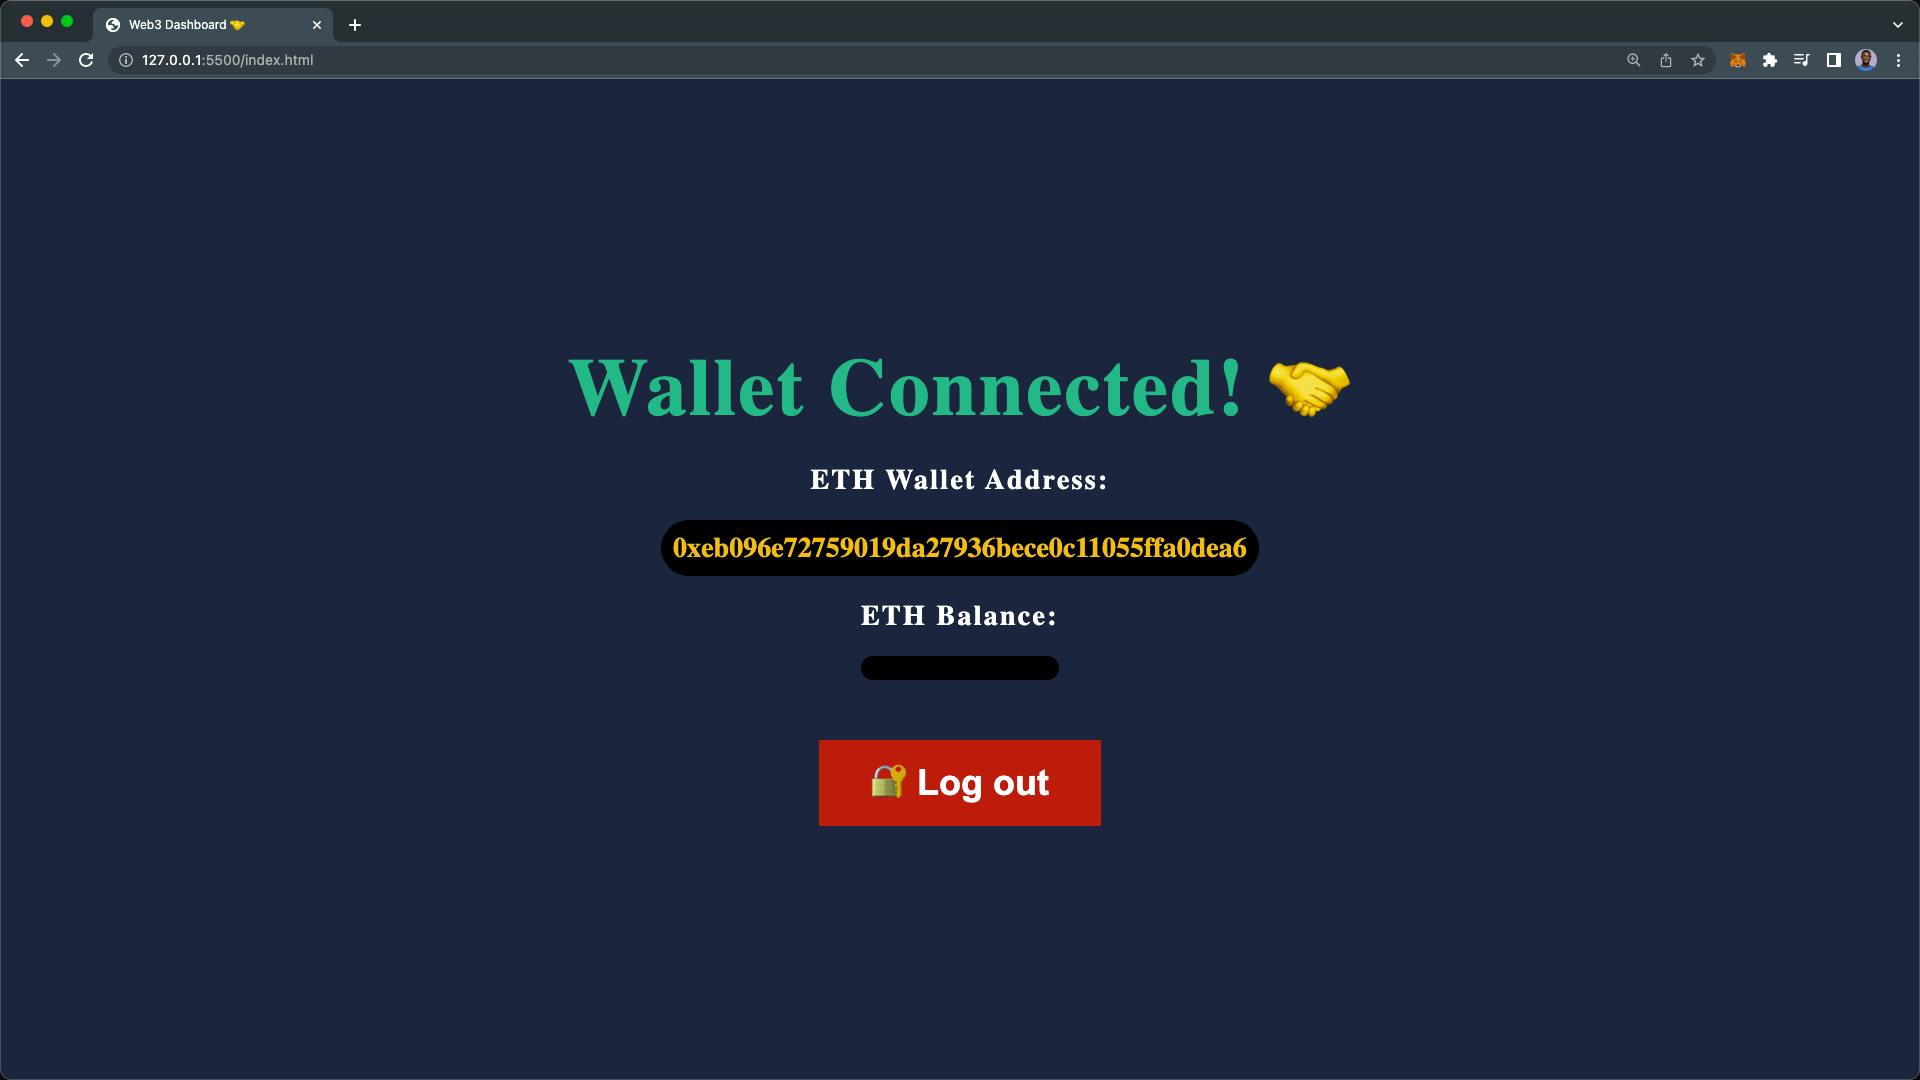 user Ethereum wallet address displayed on the dashboard after login with web3 js